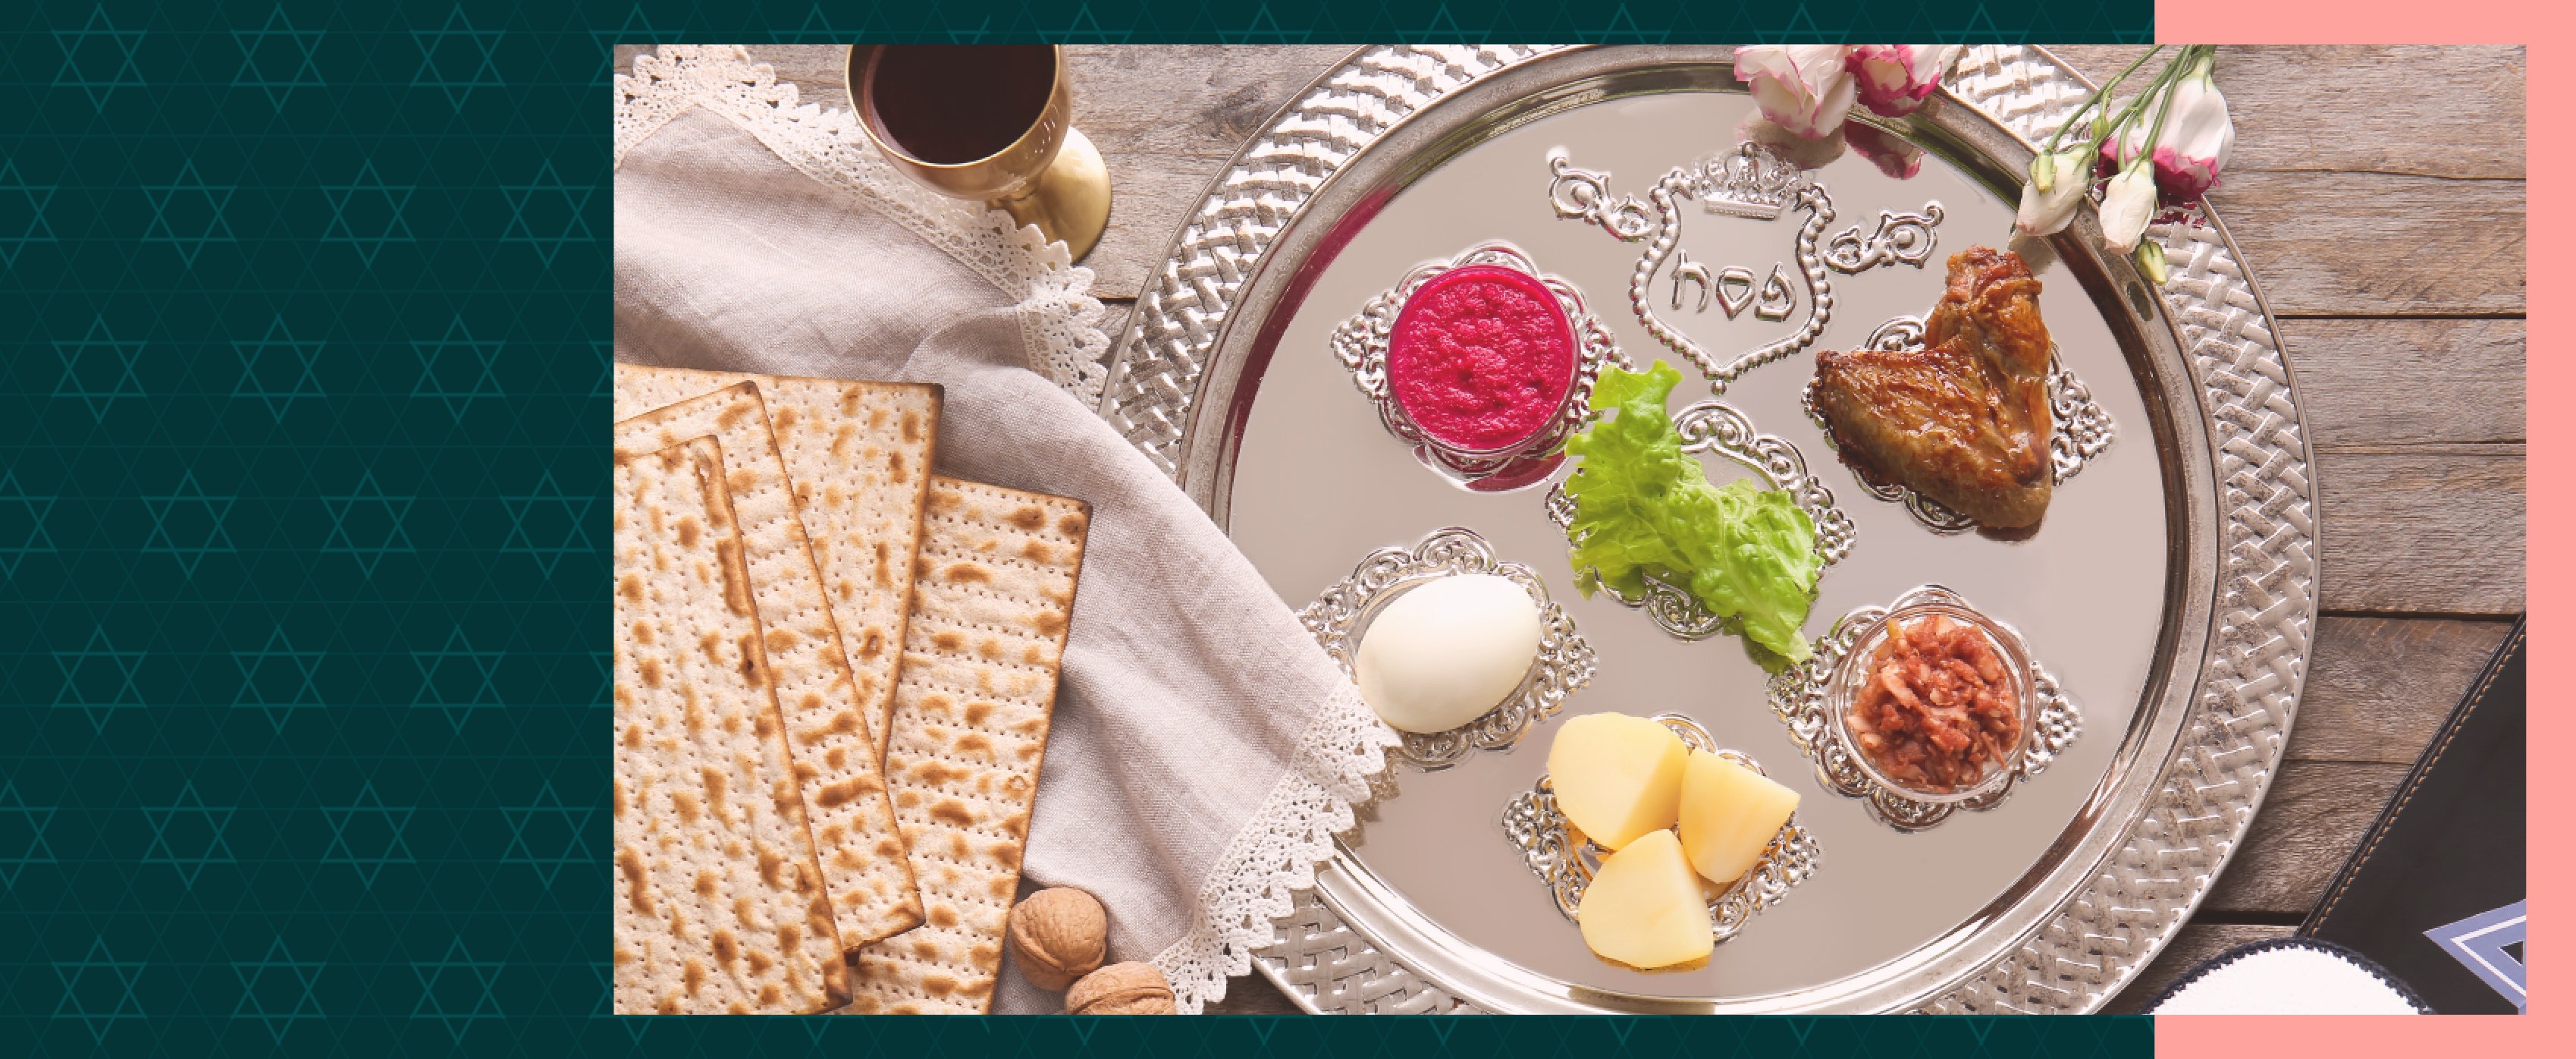 A plate with seder foods, with a side of crackers and wine.